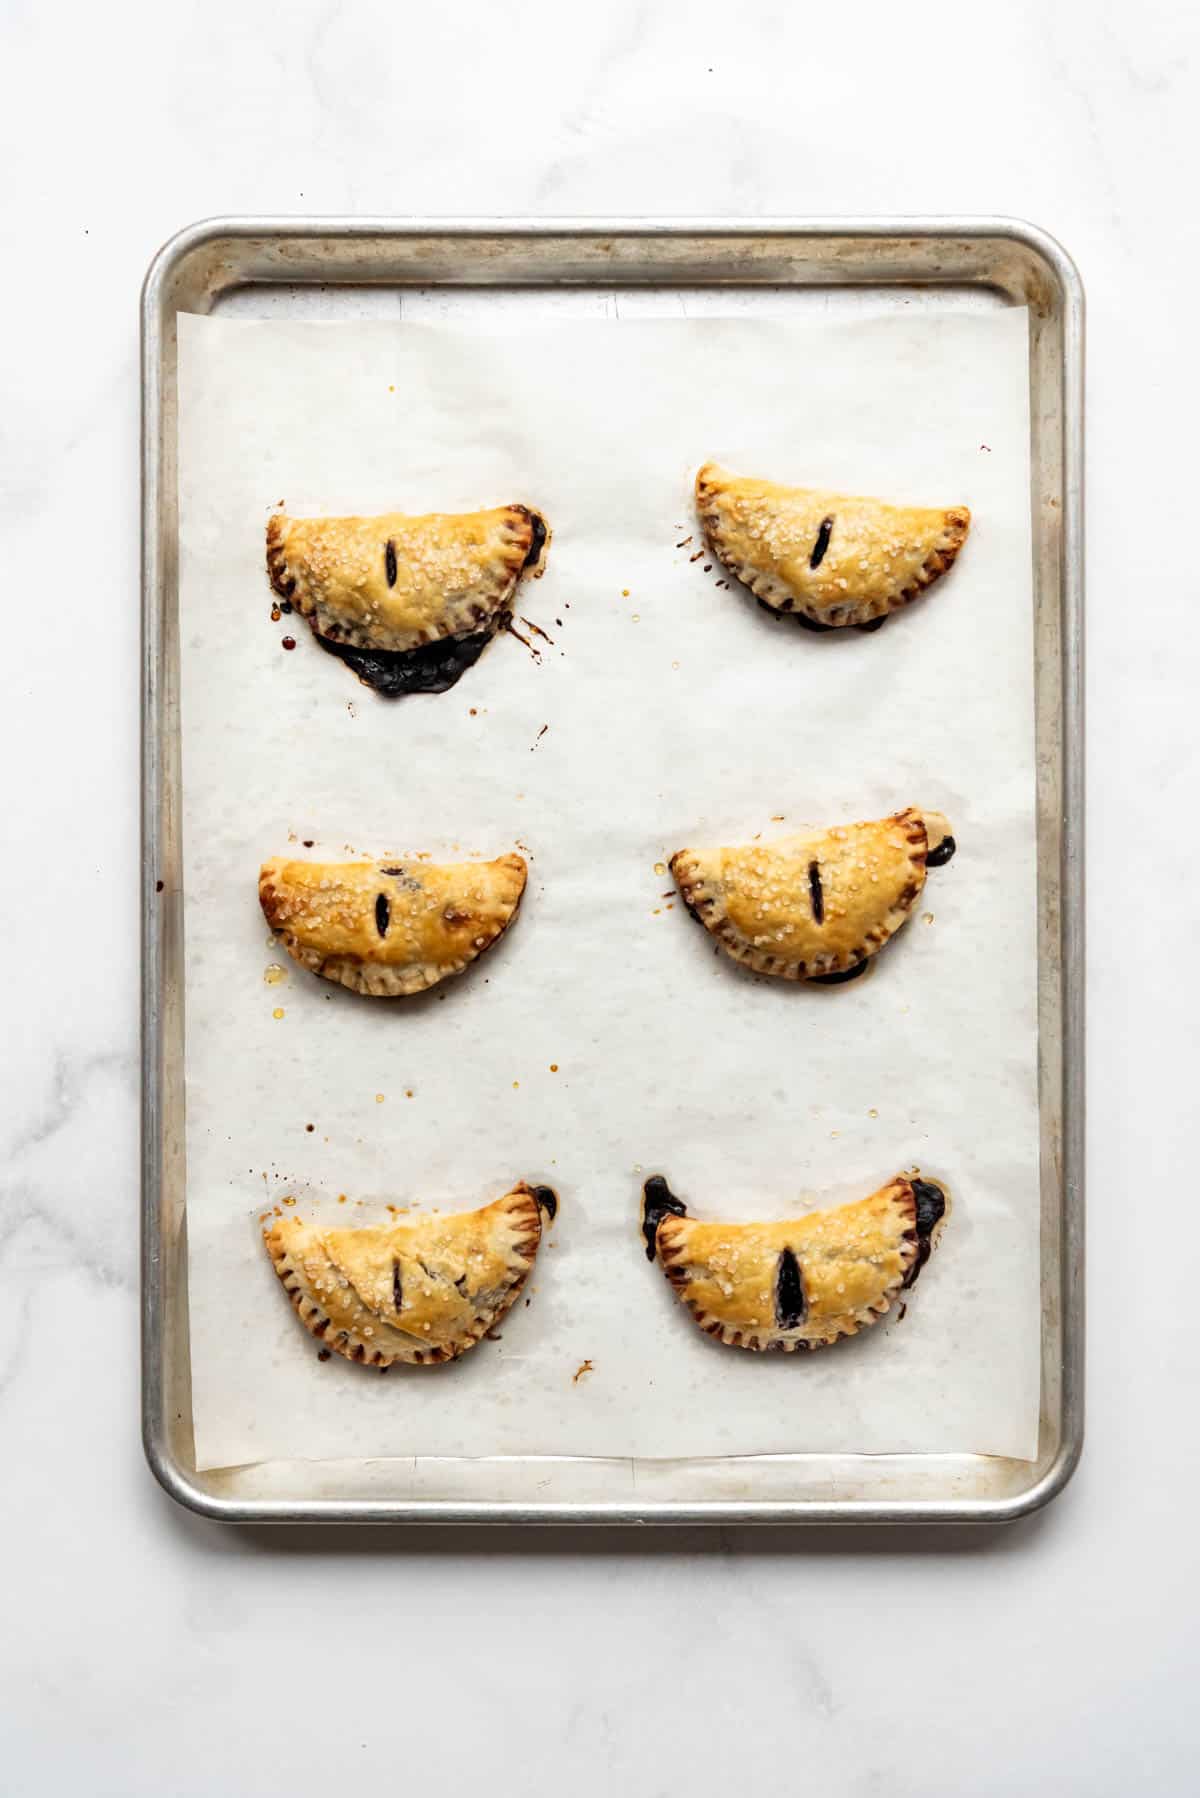 Baked blueberry hand pies on a baking sheet.